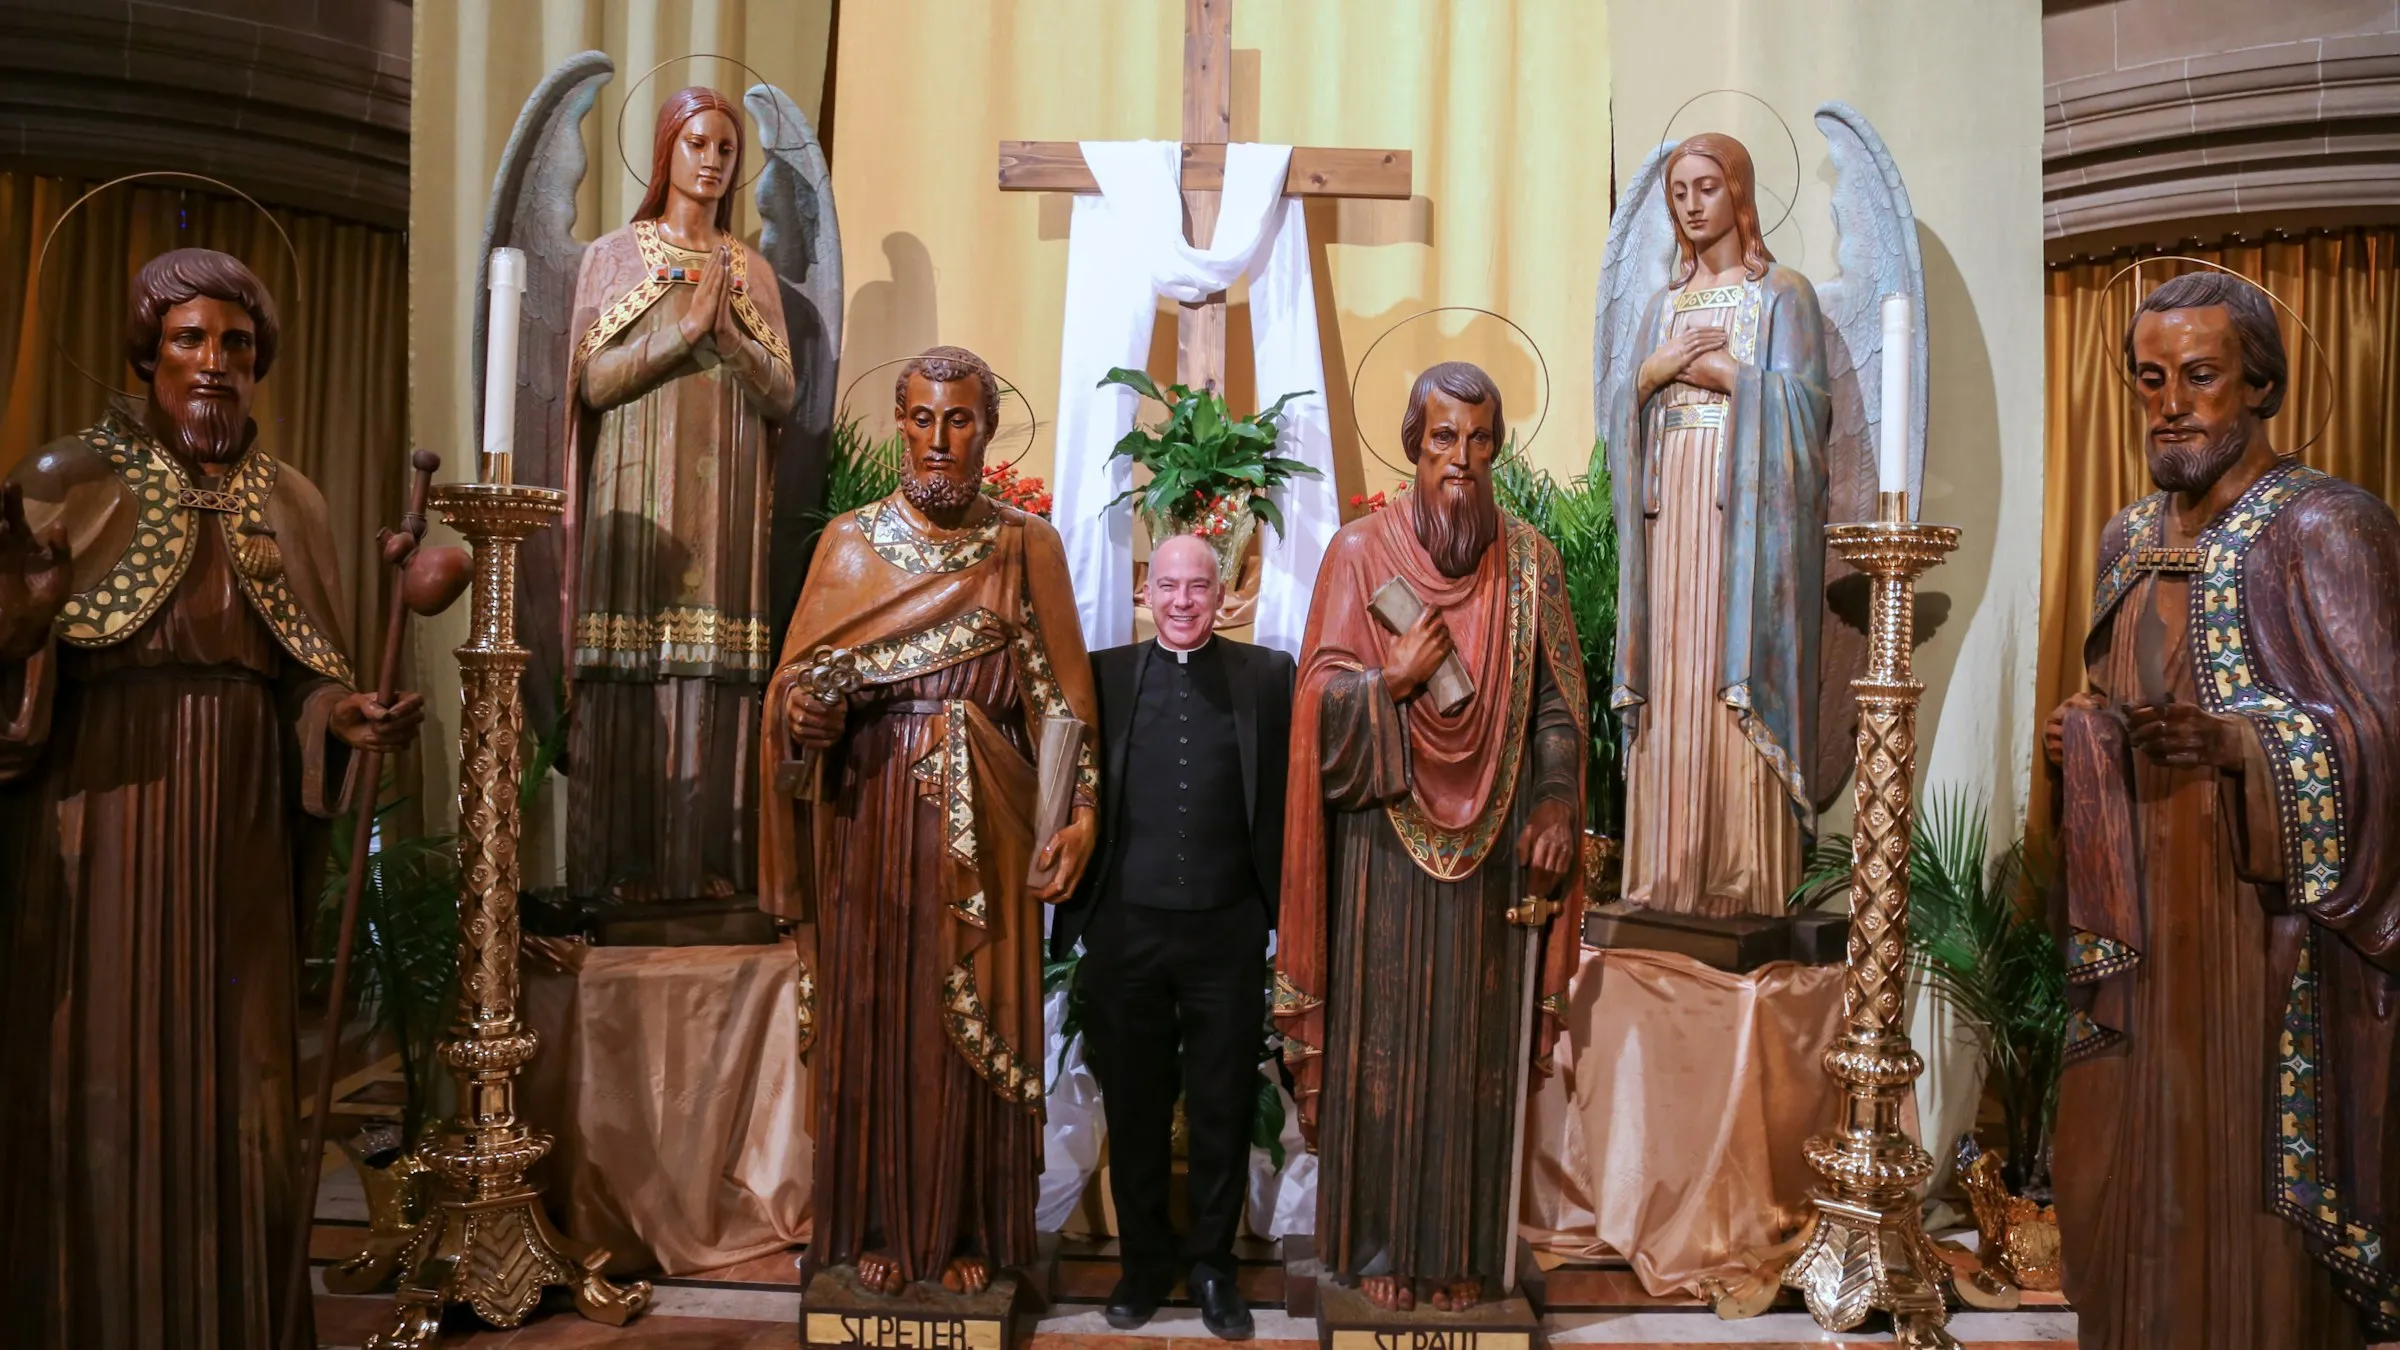 Father J.J. Mech, rector of the Cathedral of the Most Blessed Sacrament in Detroit, stands next to the life-sized statues of the apostles that have now been installed in the cathedral's worship space, along with first-class relics of each apostle. The "Journey with the Saints" pilgrimage, which will be dedicated Feb. 8, 2024, in a special ceremony with Archbishop Allen H. Vigneron, is part of the cathedral's ongoing transformation into an "apostolic center for the arts and culture."?w=200&h=150